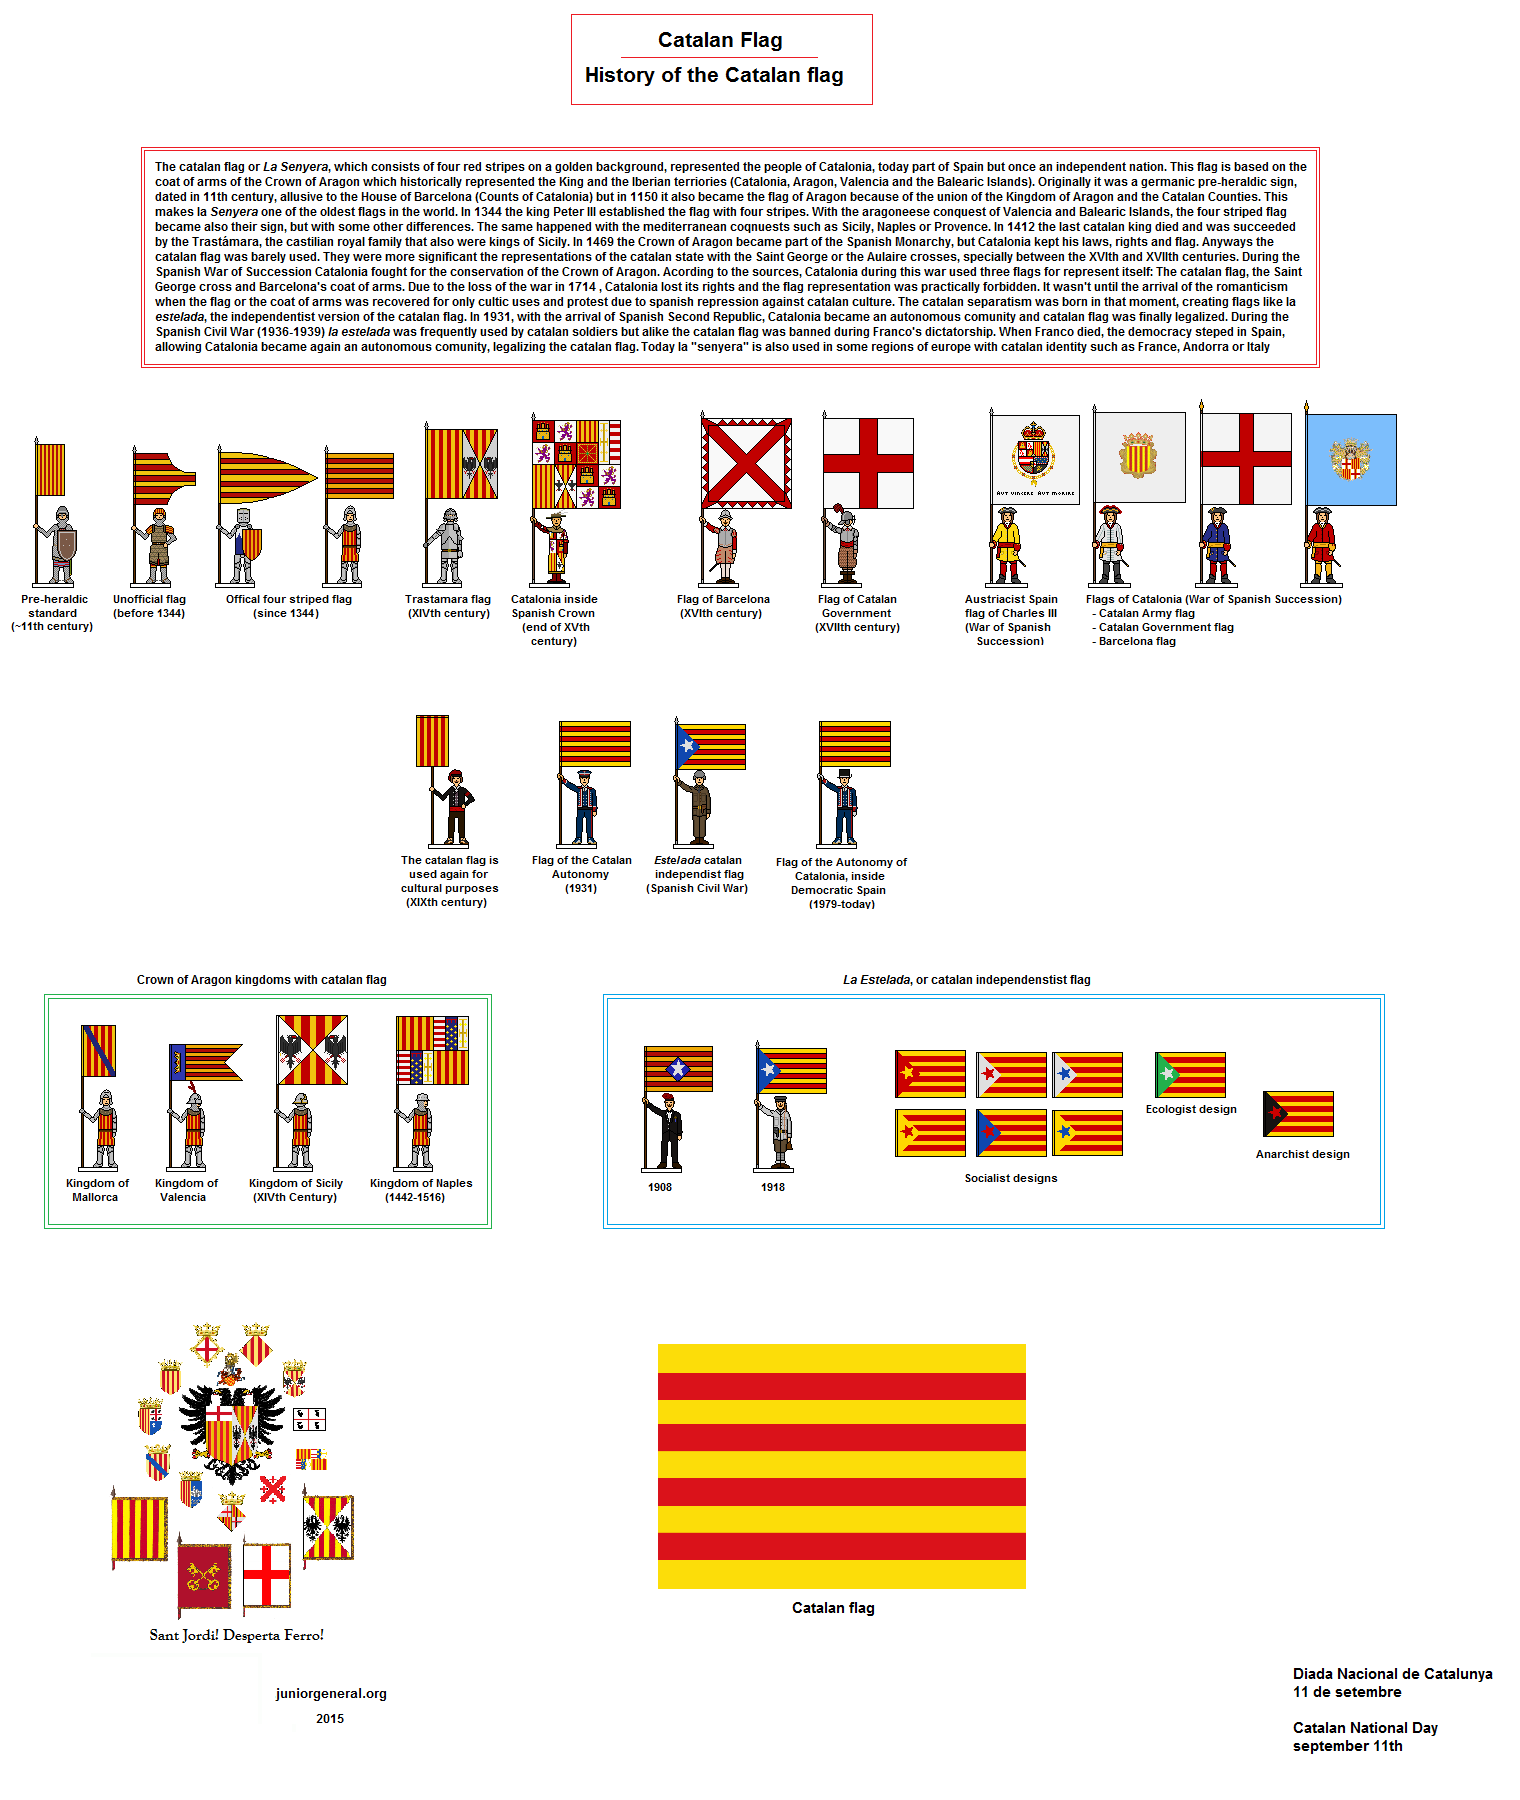 History of the Catalan Flag